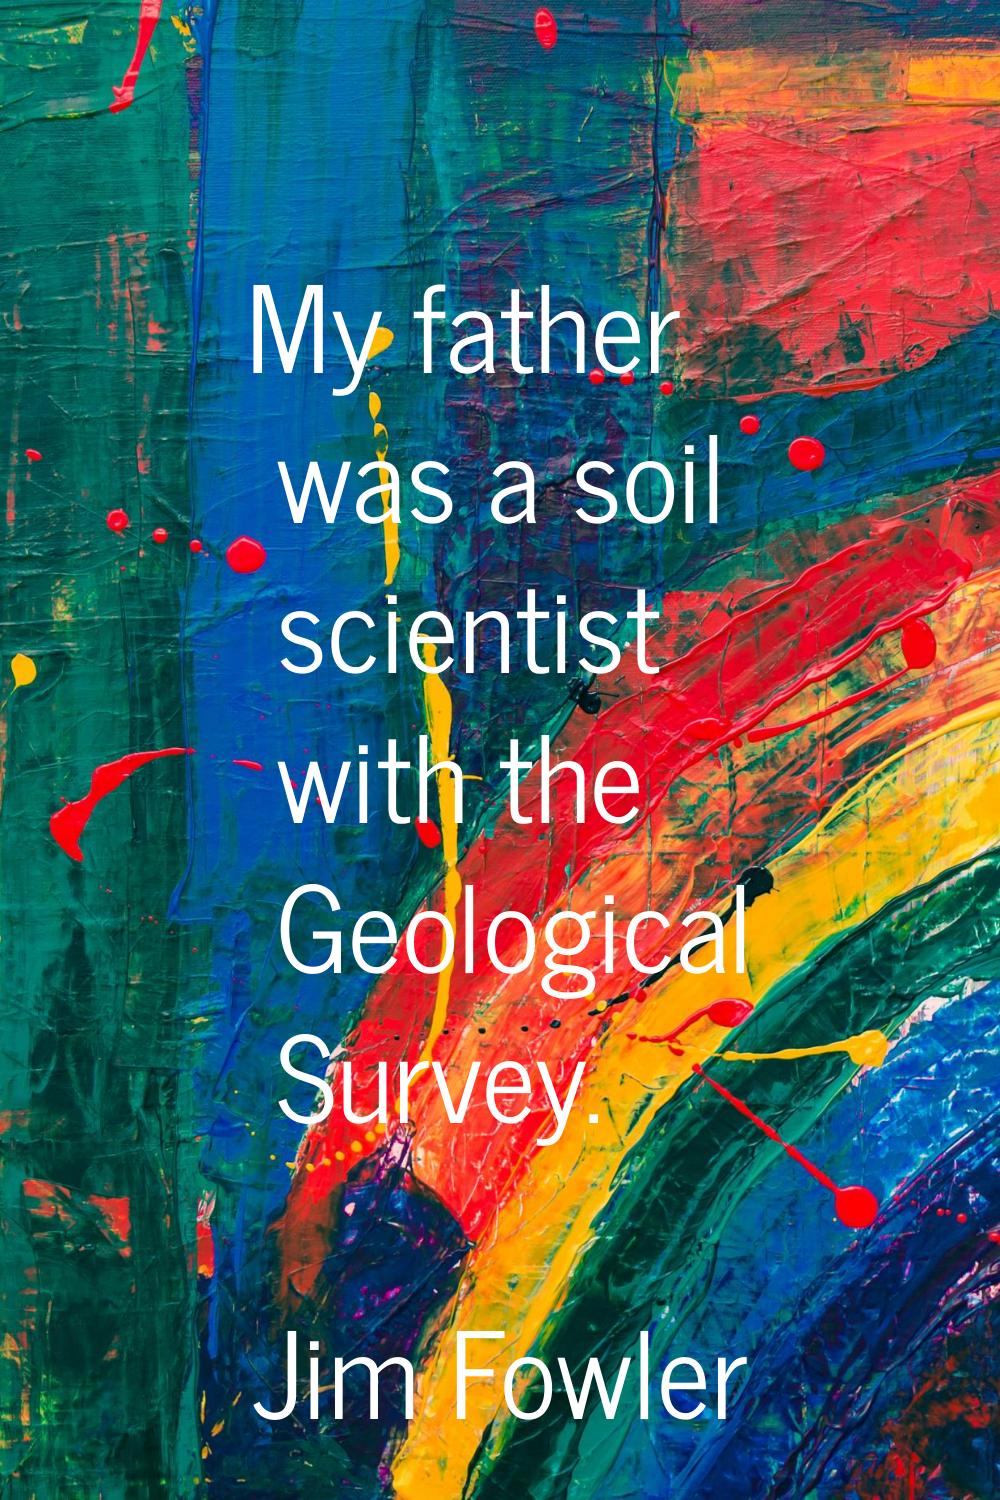 My father was a soil scientist with the Geological Survey.